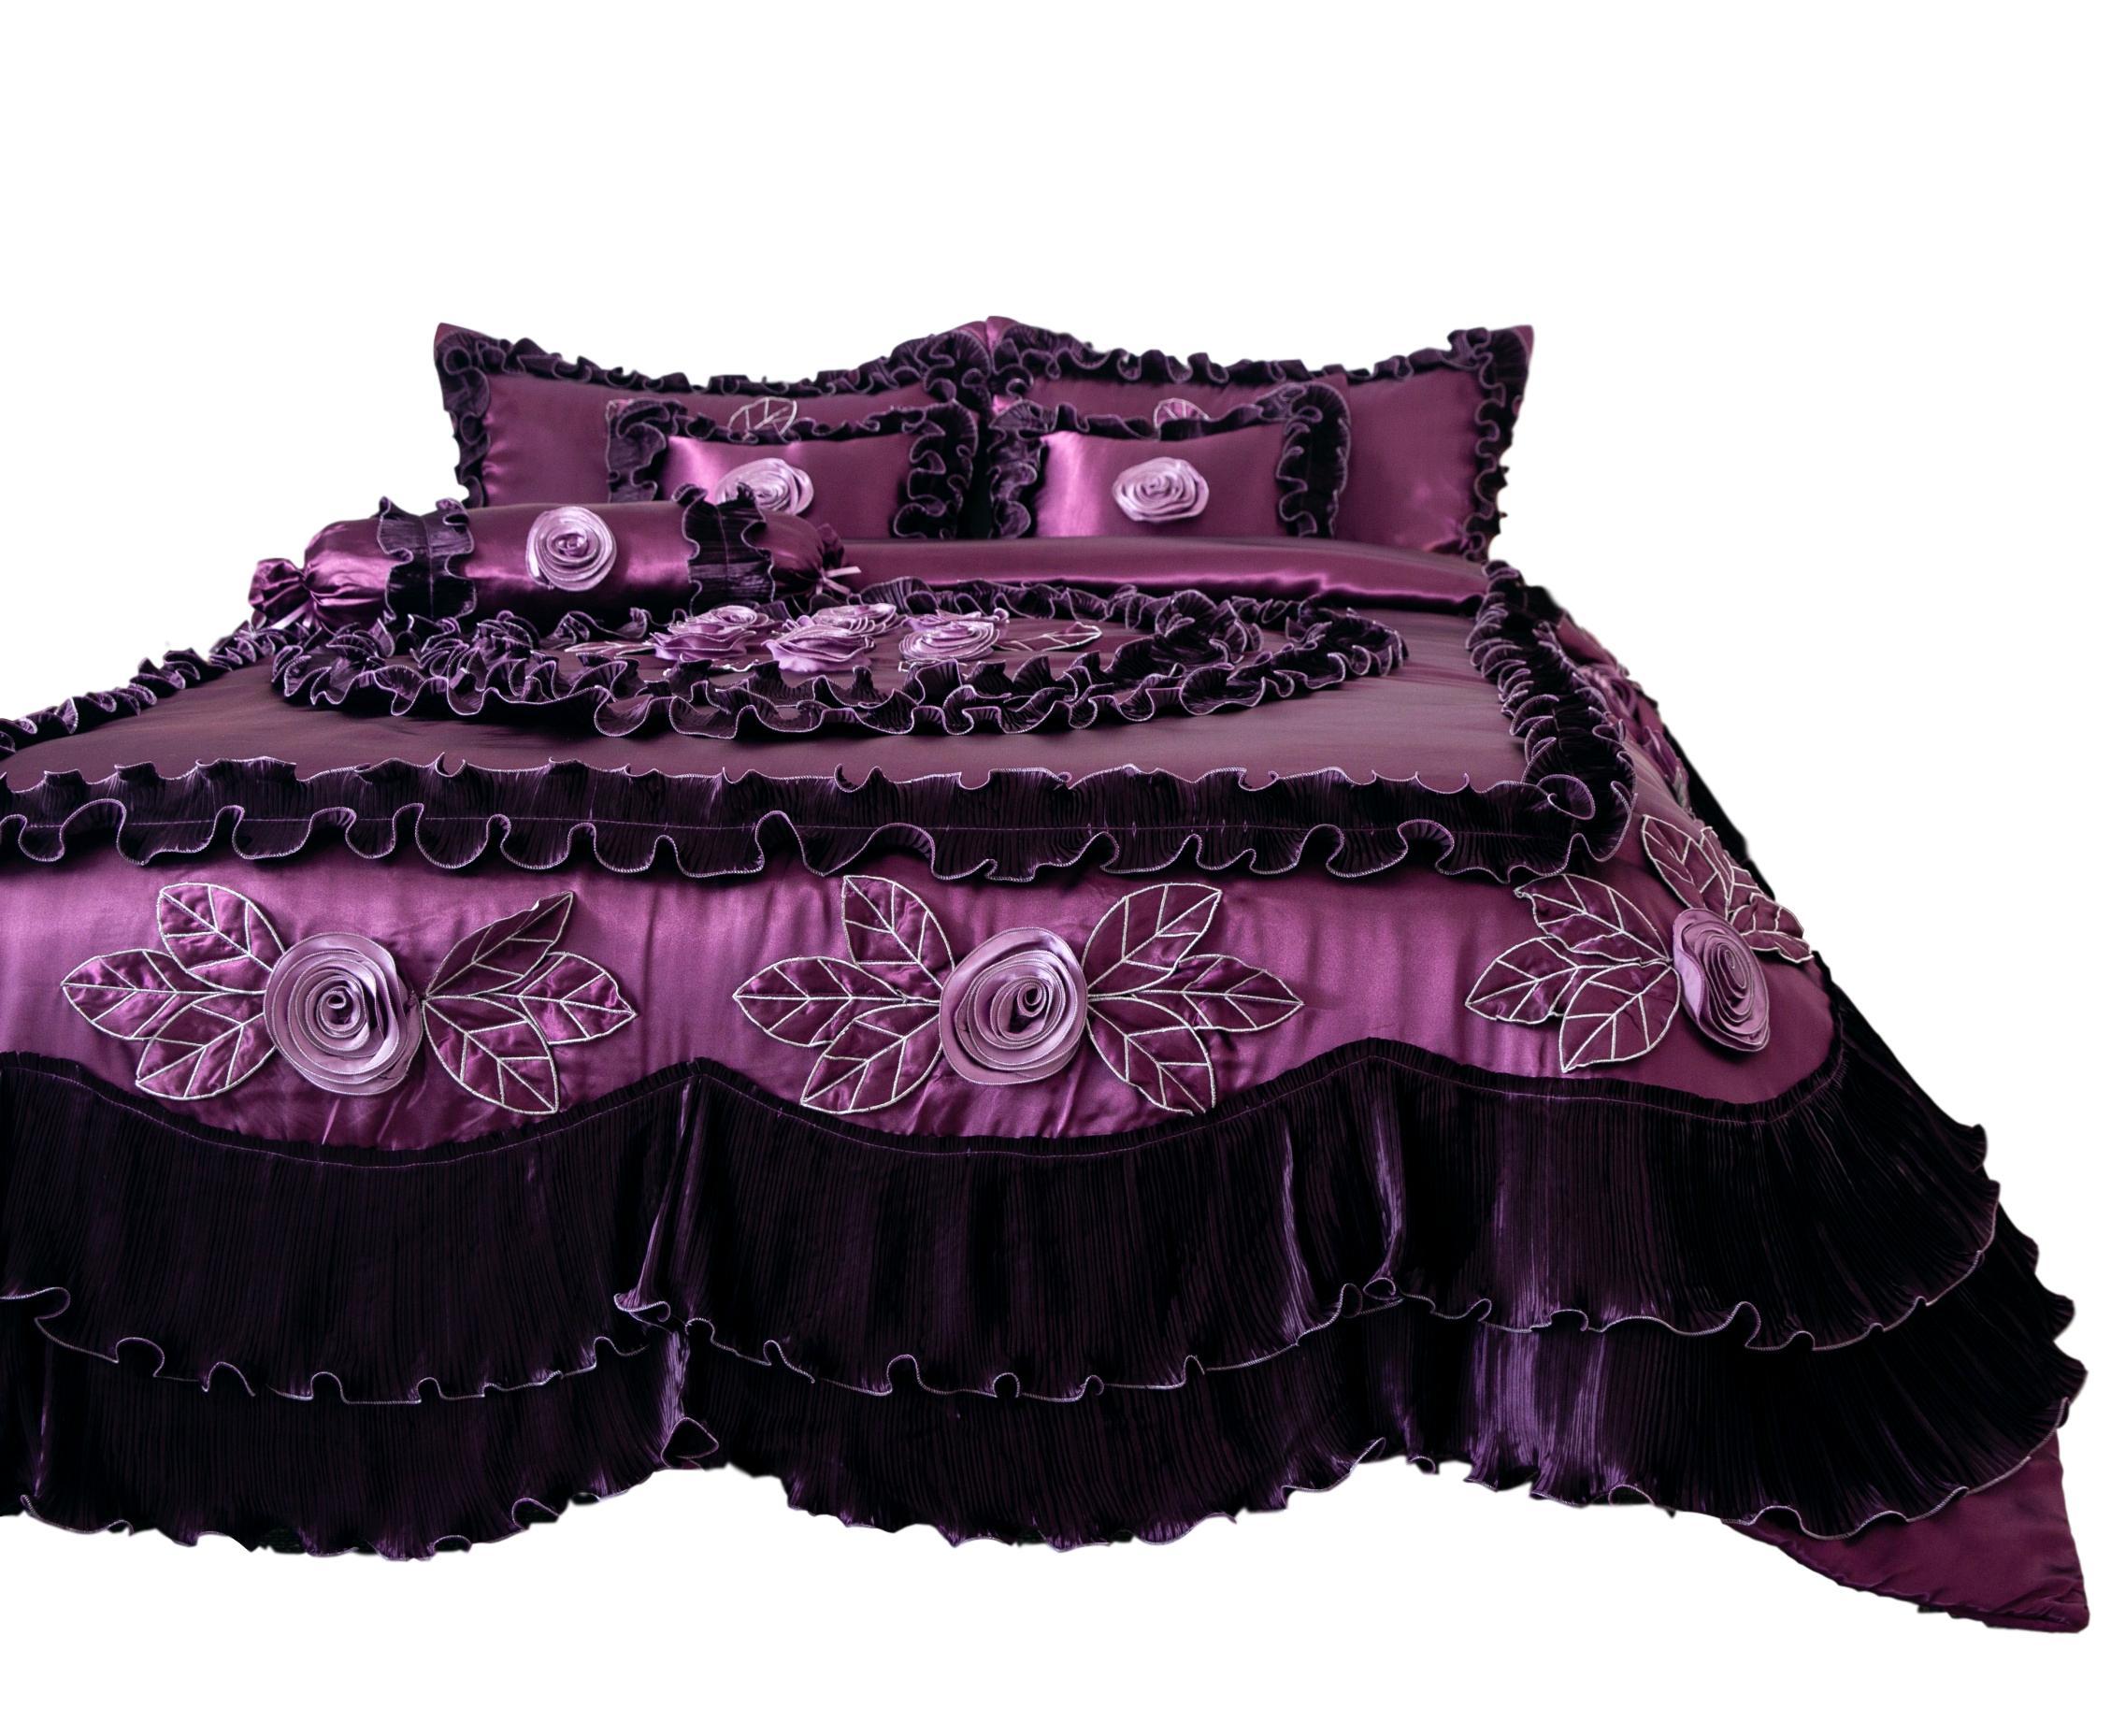 Mainstays Black Floral 10-Piece Bed in a Bag Comforter Set with Sheets,  Queen 